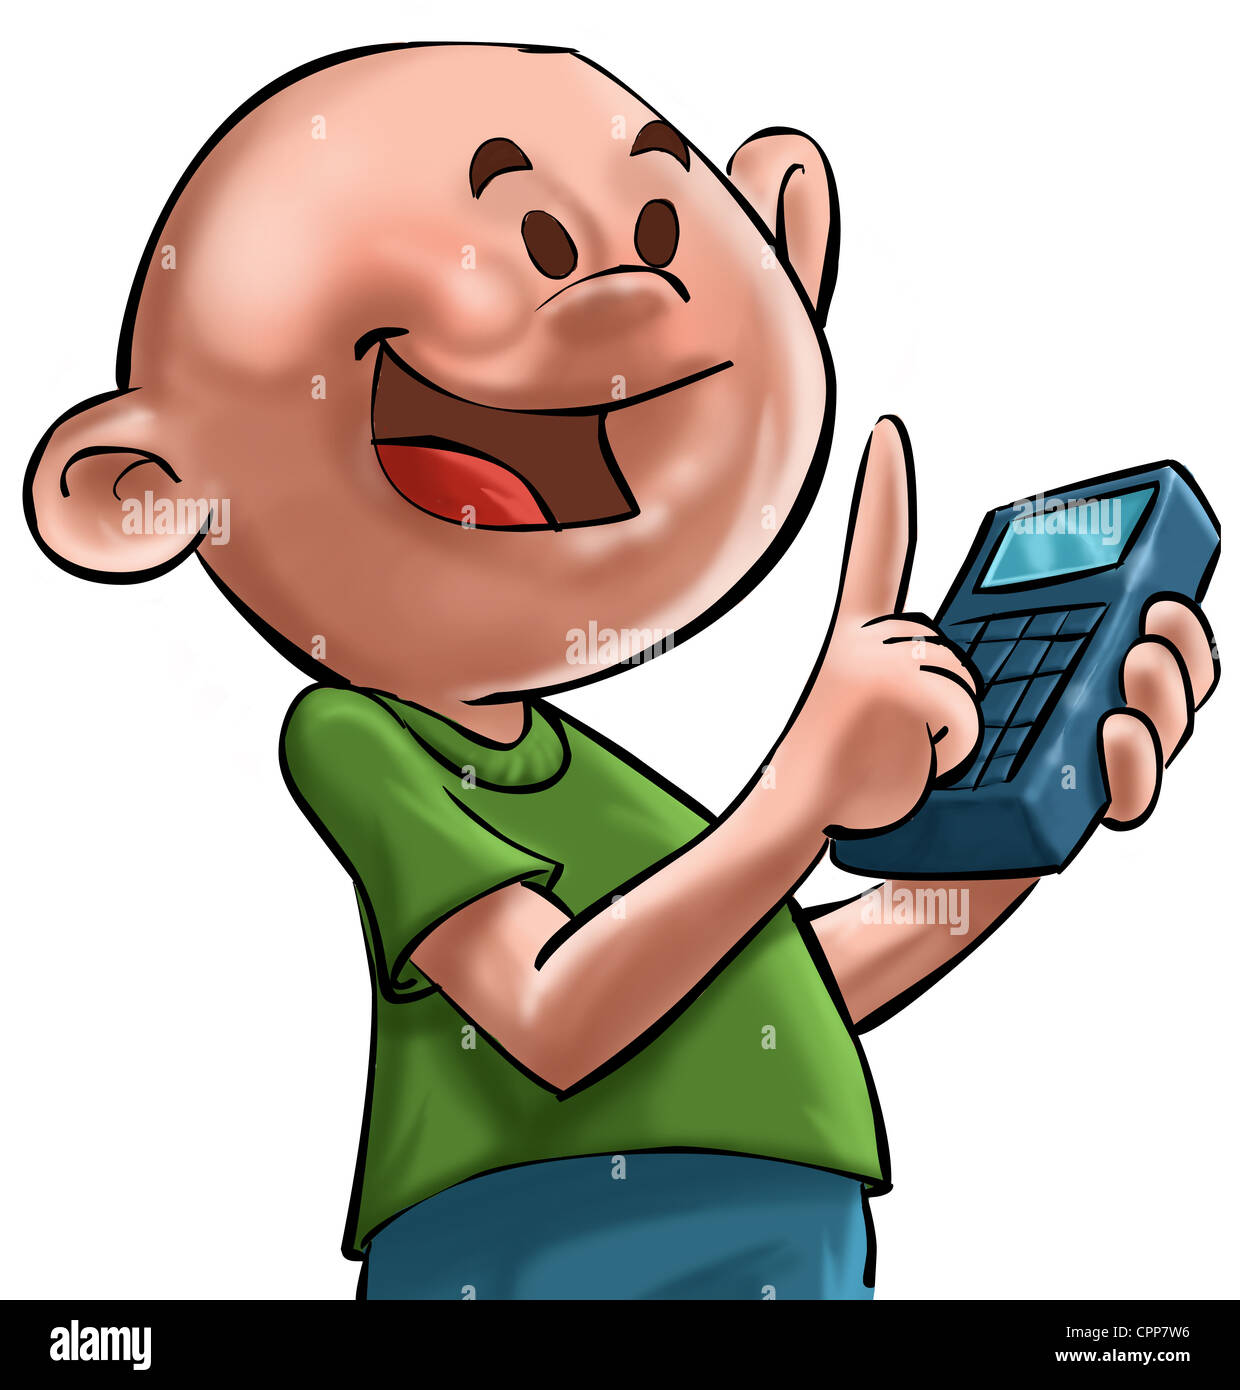 a young and bald boy witha a calculator in his hand Stock Photo